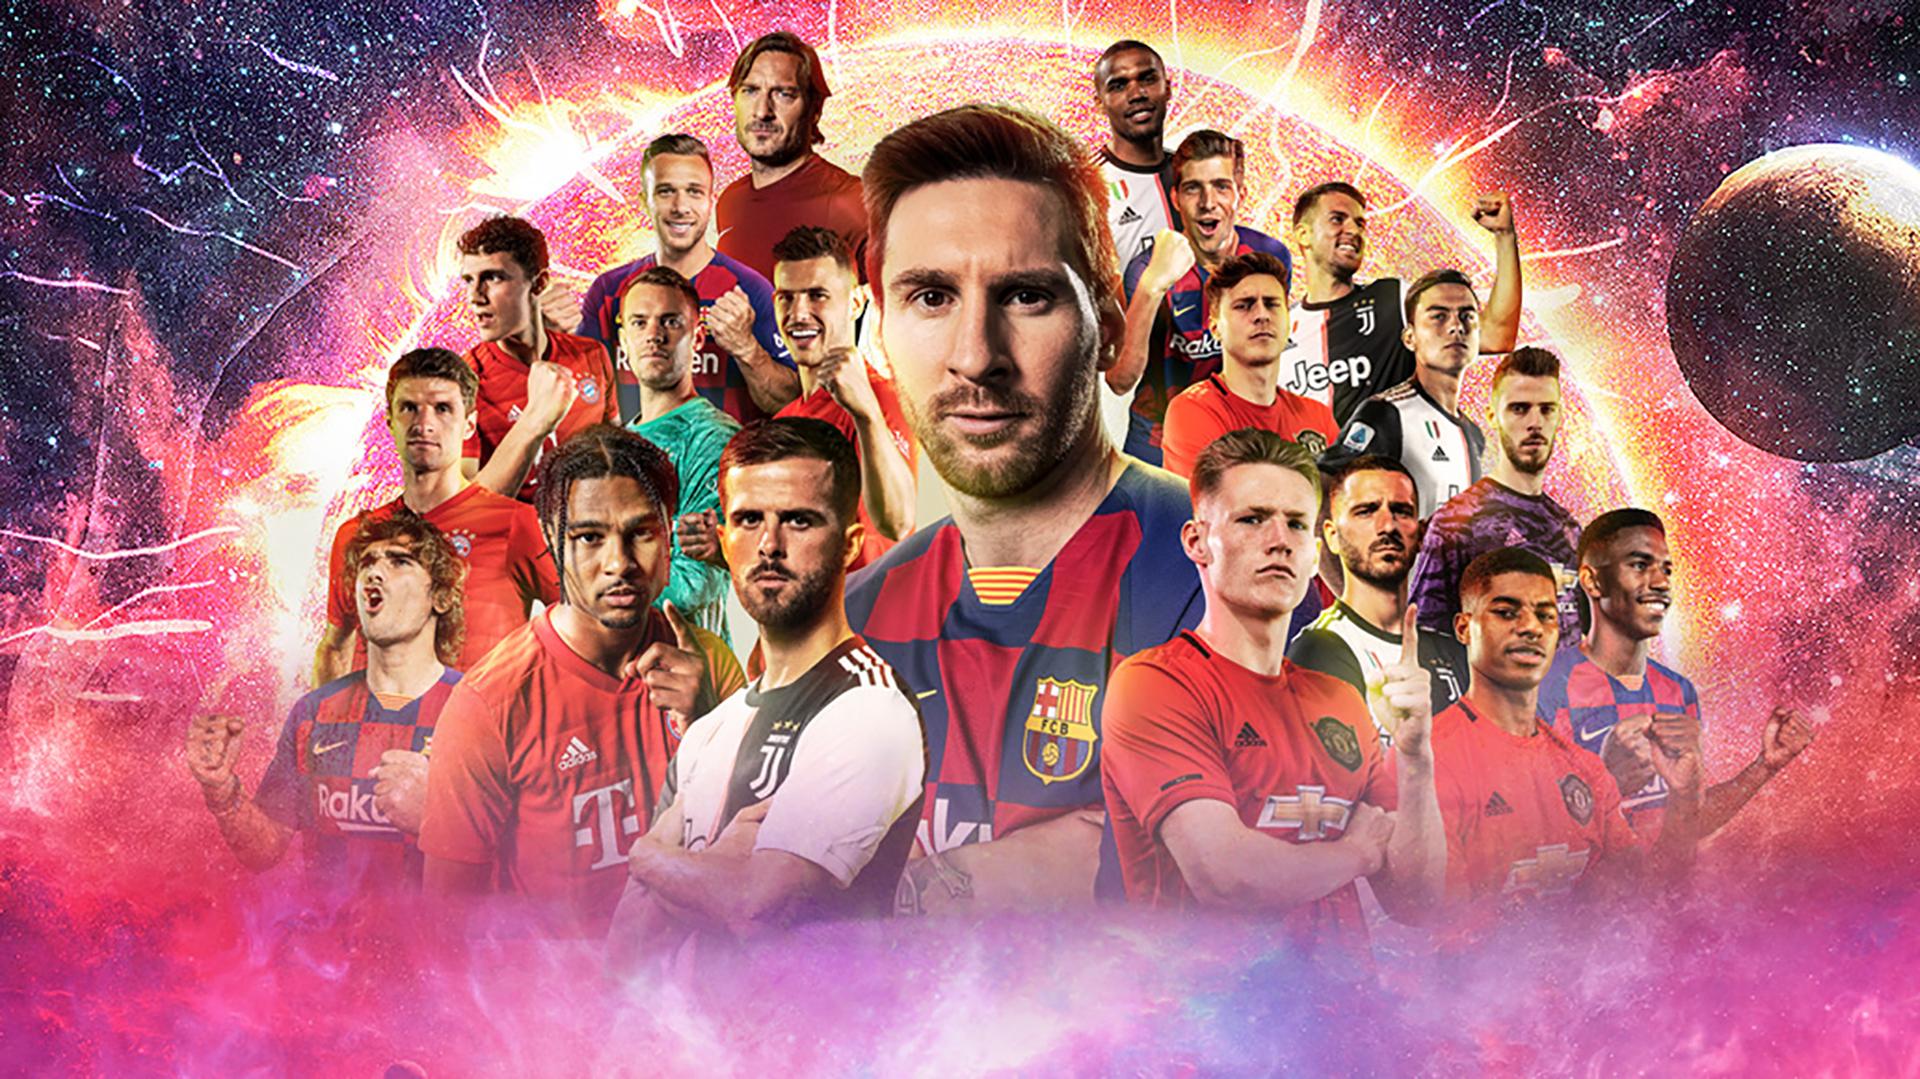 Konami is adding more and more starpower to their PES franchise every year.